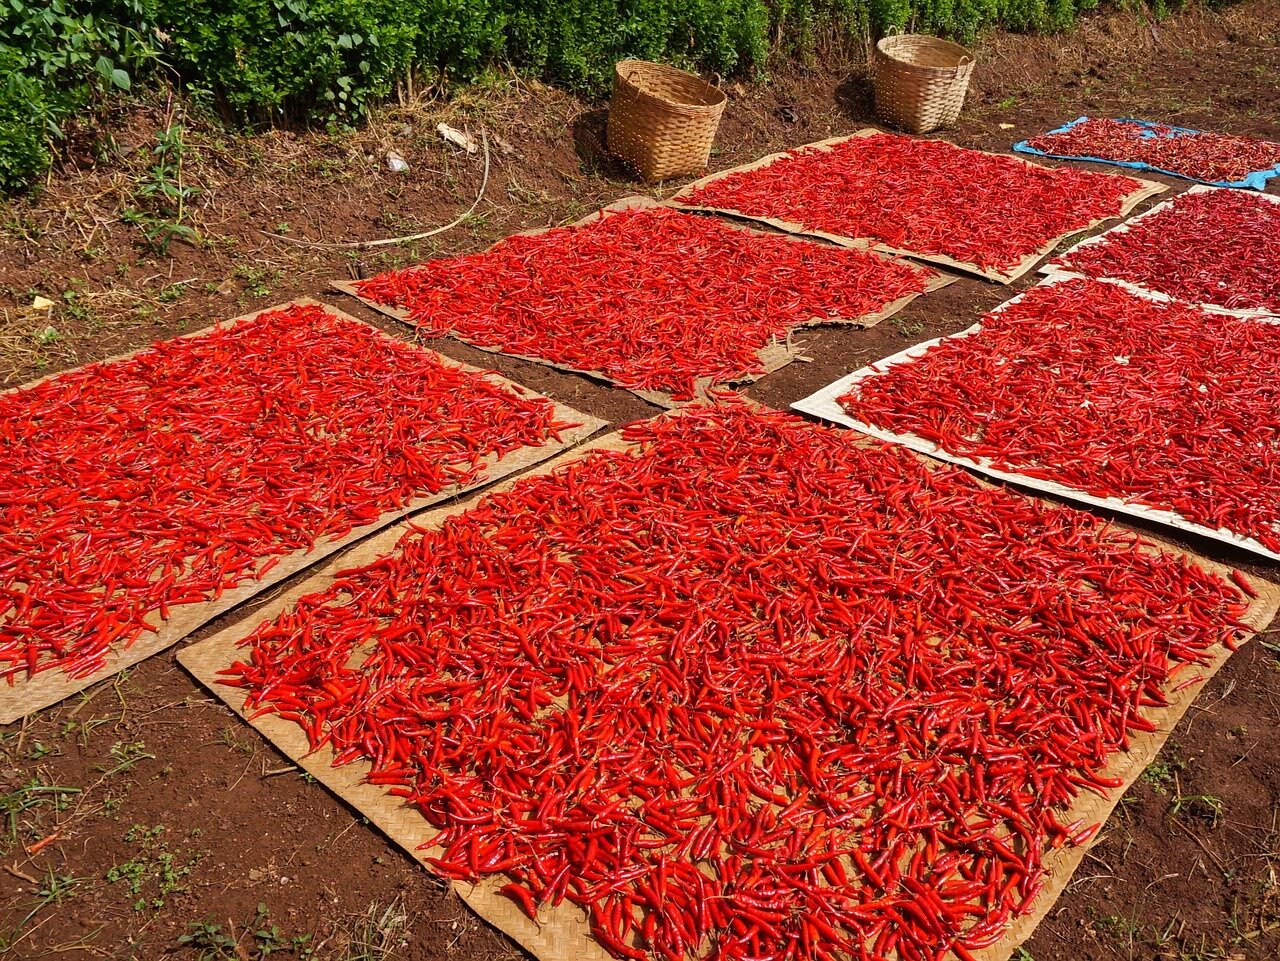 Drying peppers on air